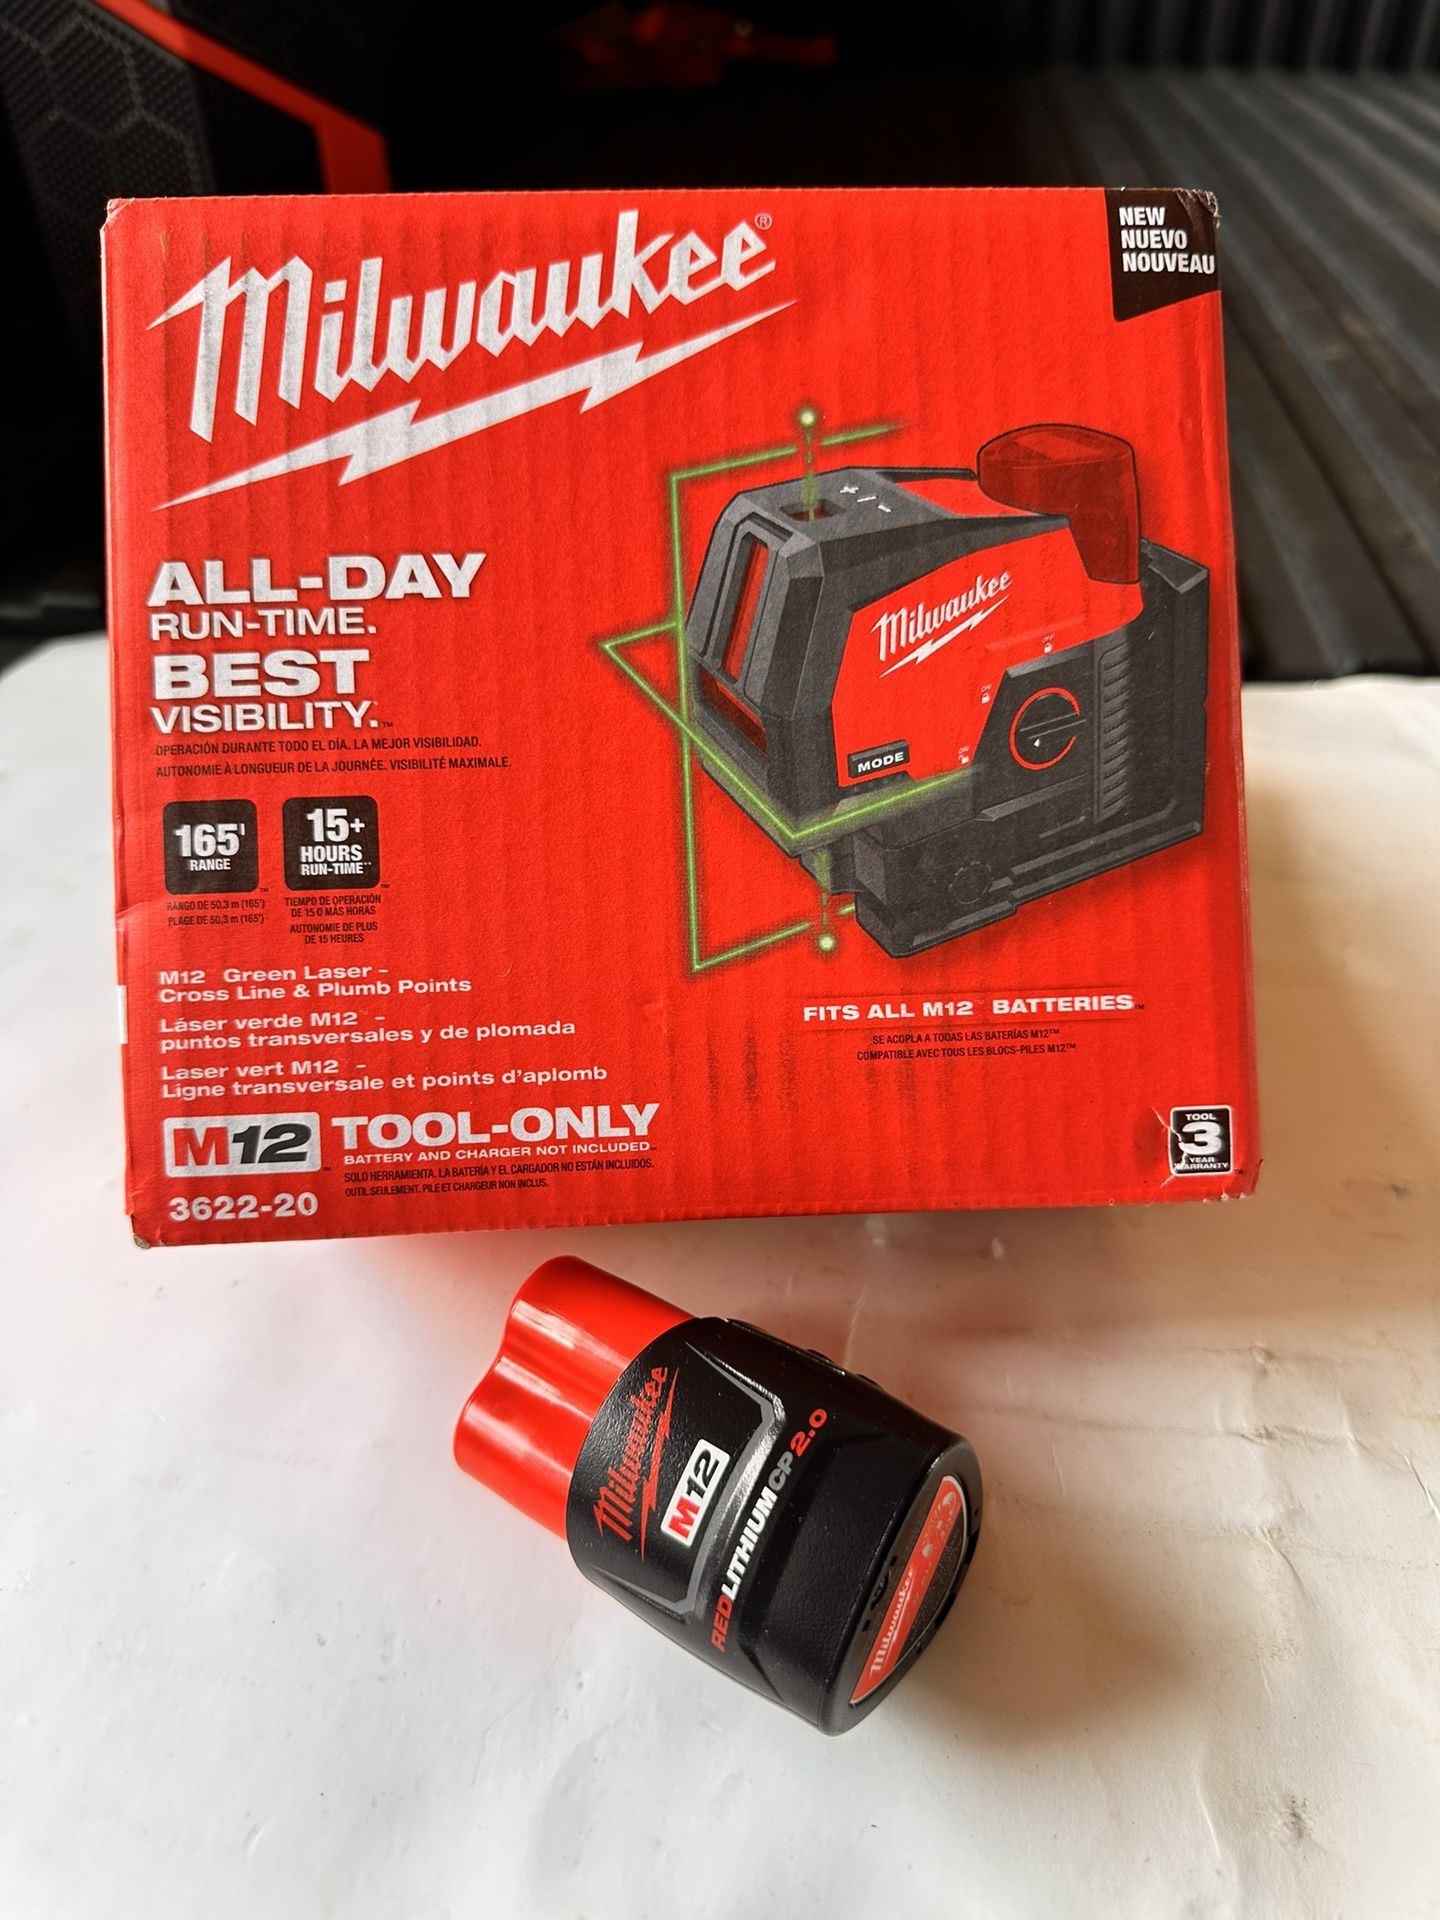 📌Milwaukee M12 12-Volt Lithium-Ion Cordless Green 125 ft. Cross Line and Plumb Points Laser Level with M12 CP 2.0 Battery Pack ( PRECIO FIRME 👉$295